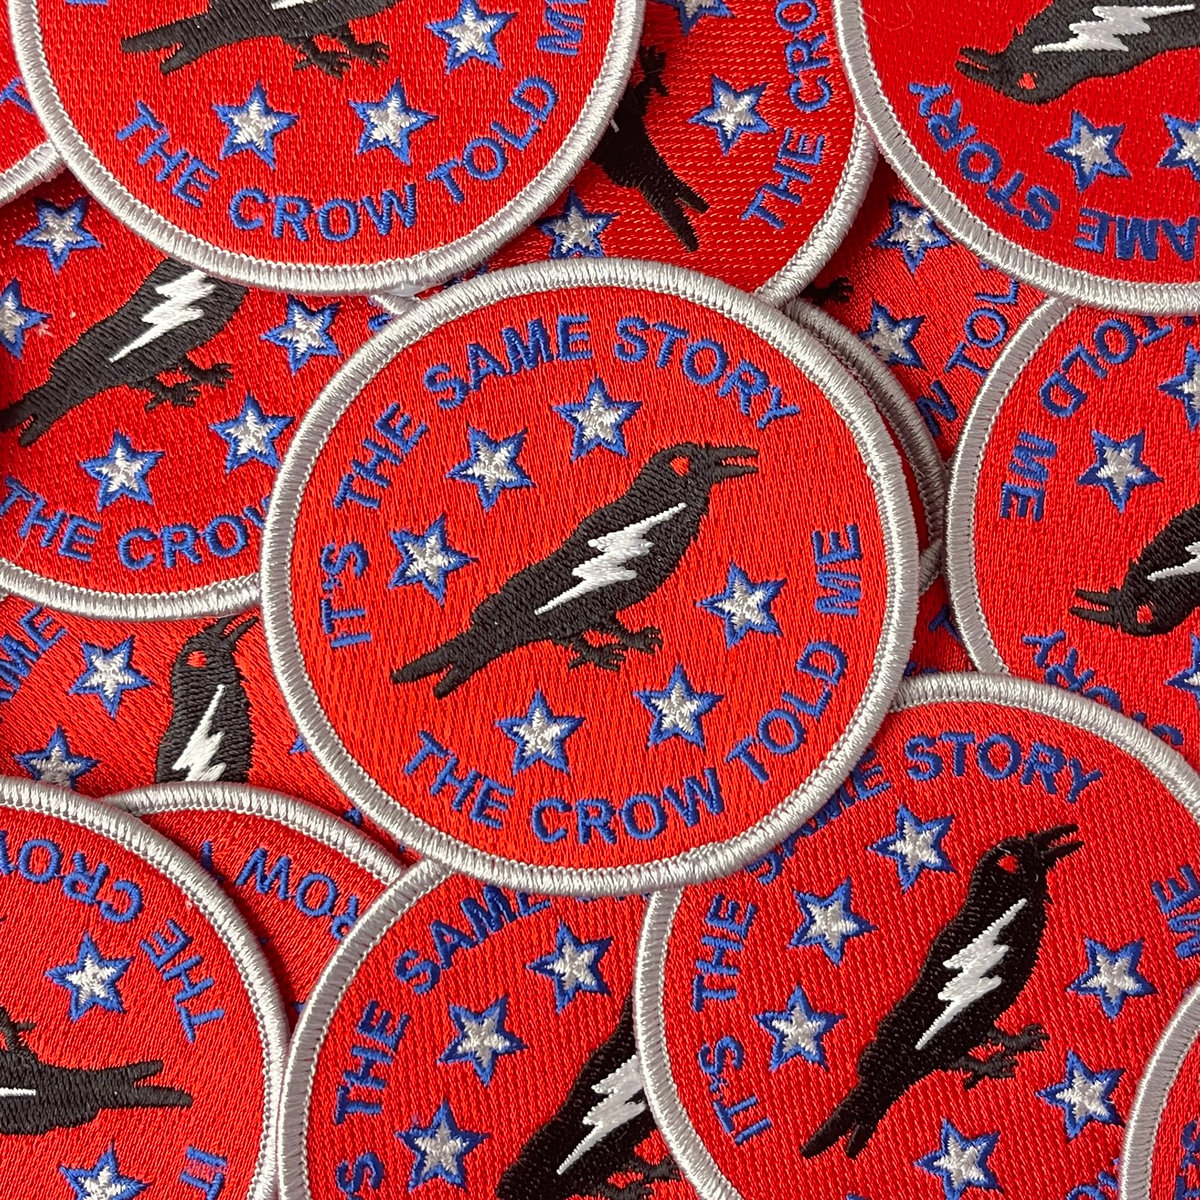 Crow Embroidered Patch - 3” Round